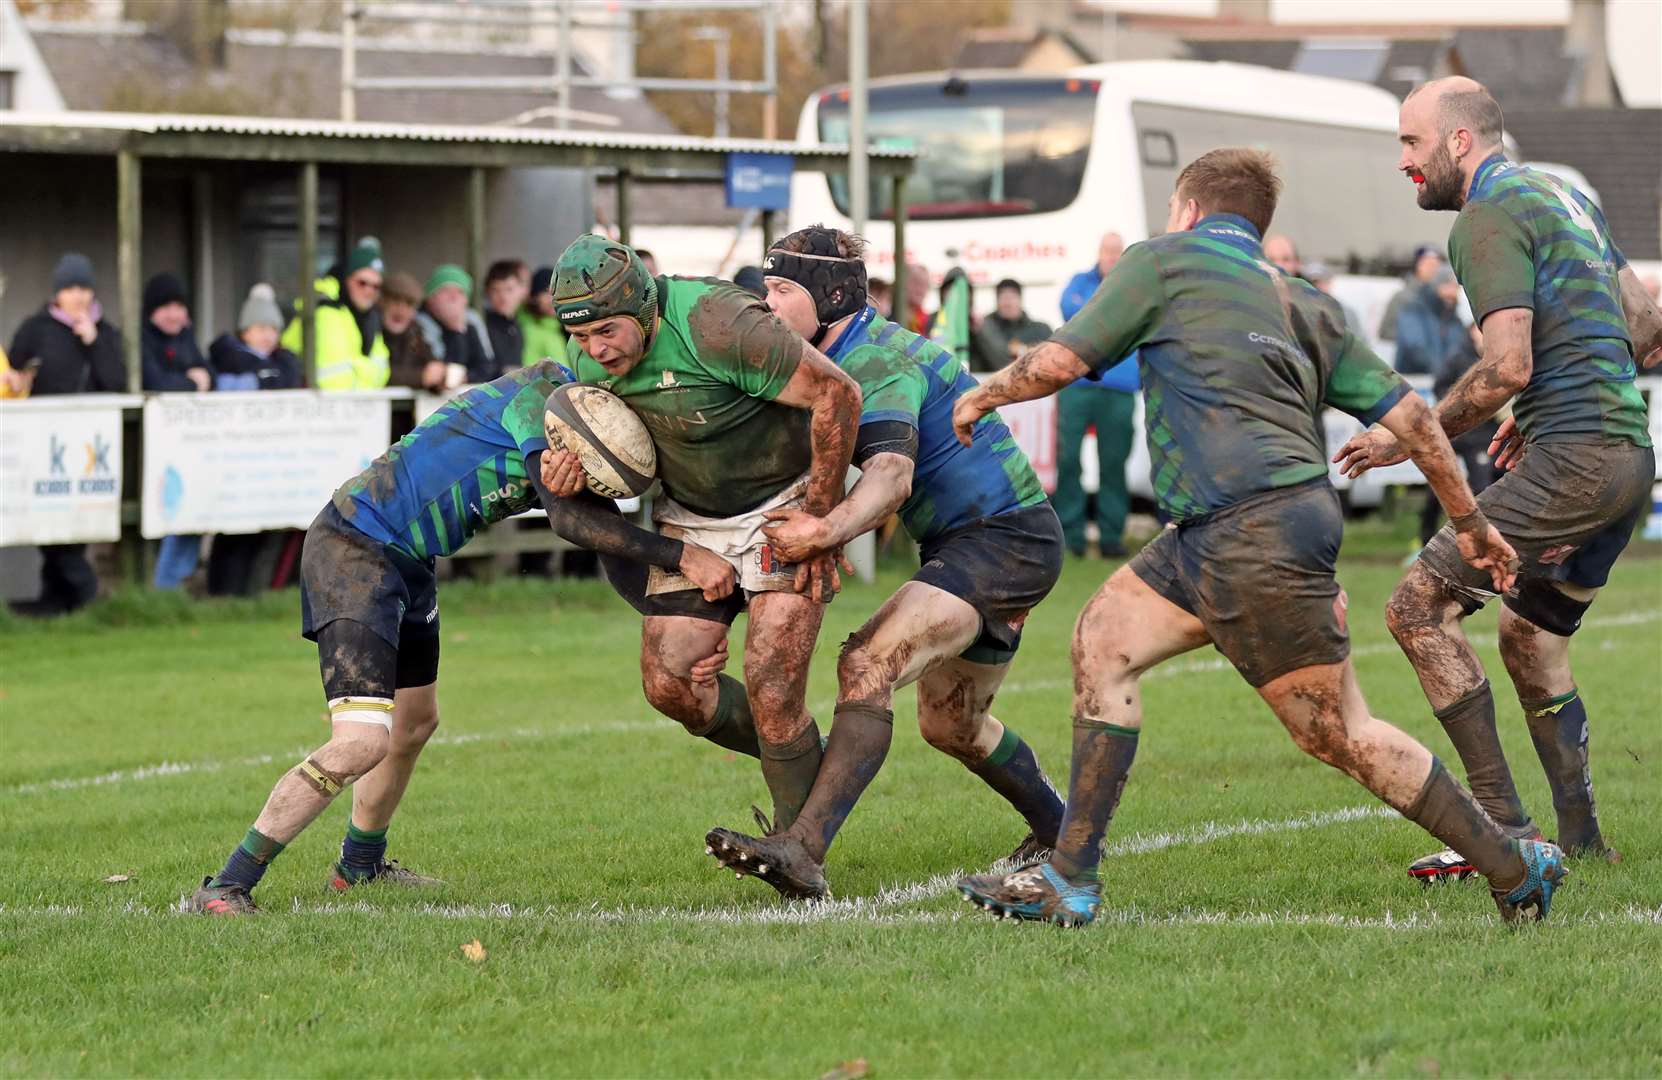 Hamish Coghill charges towards the try line only to be stopped. Picture: James Gunn